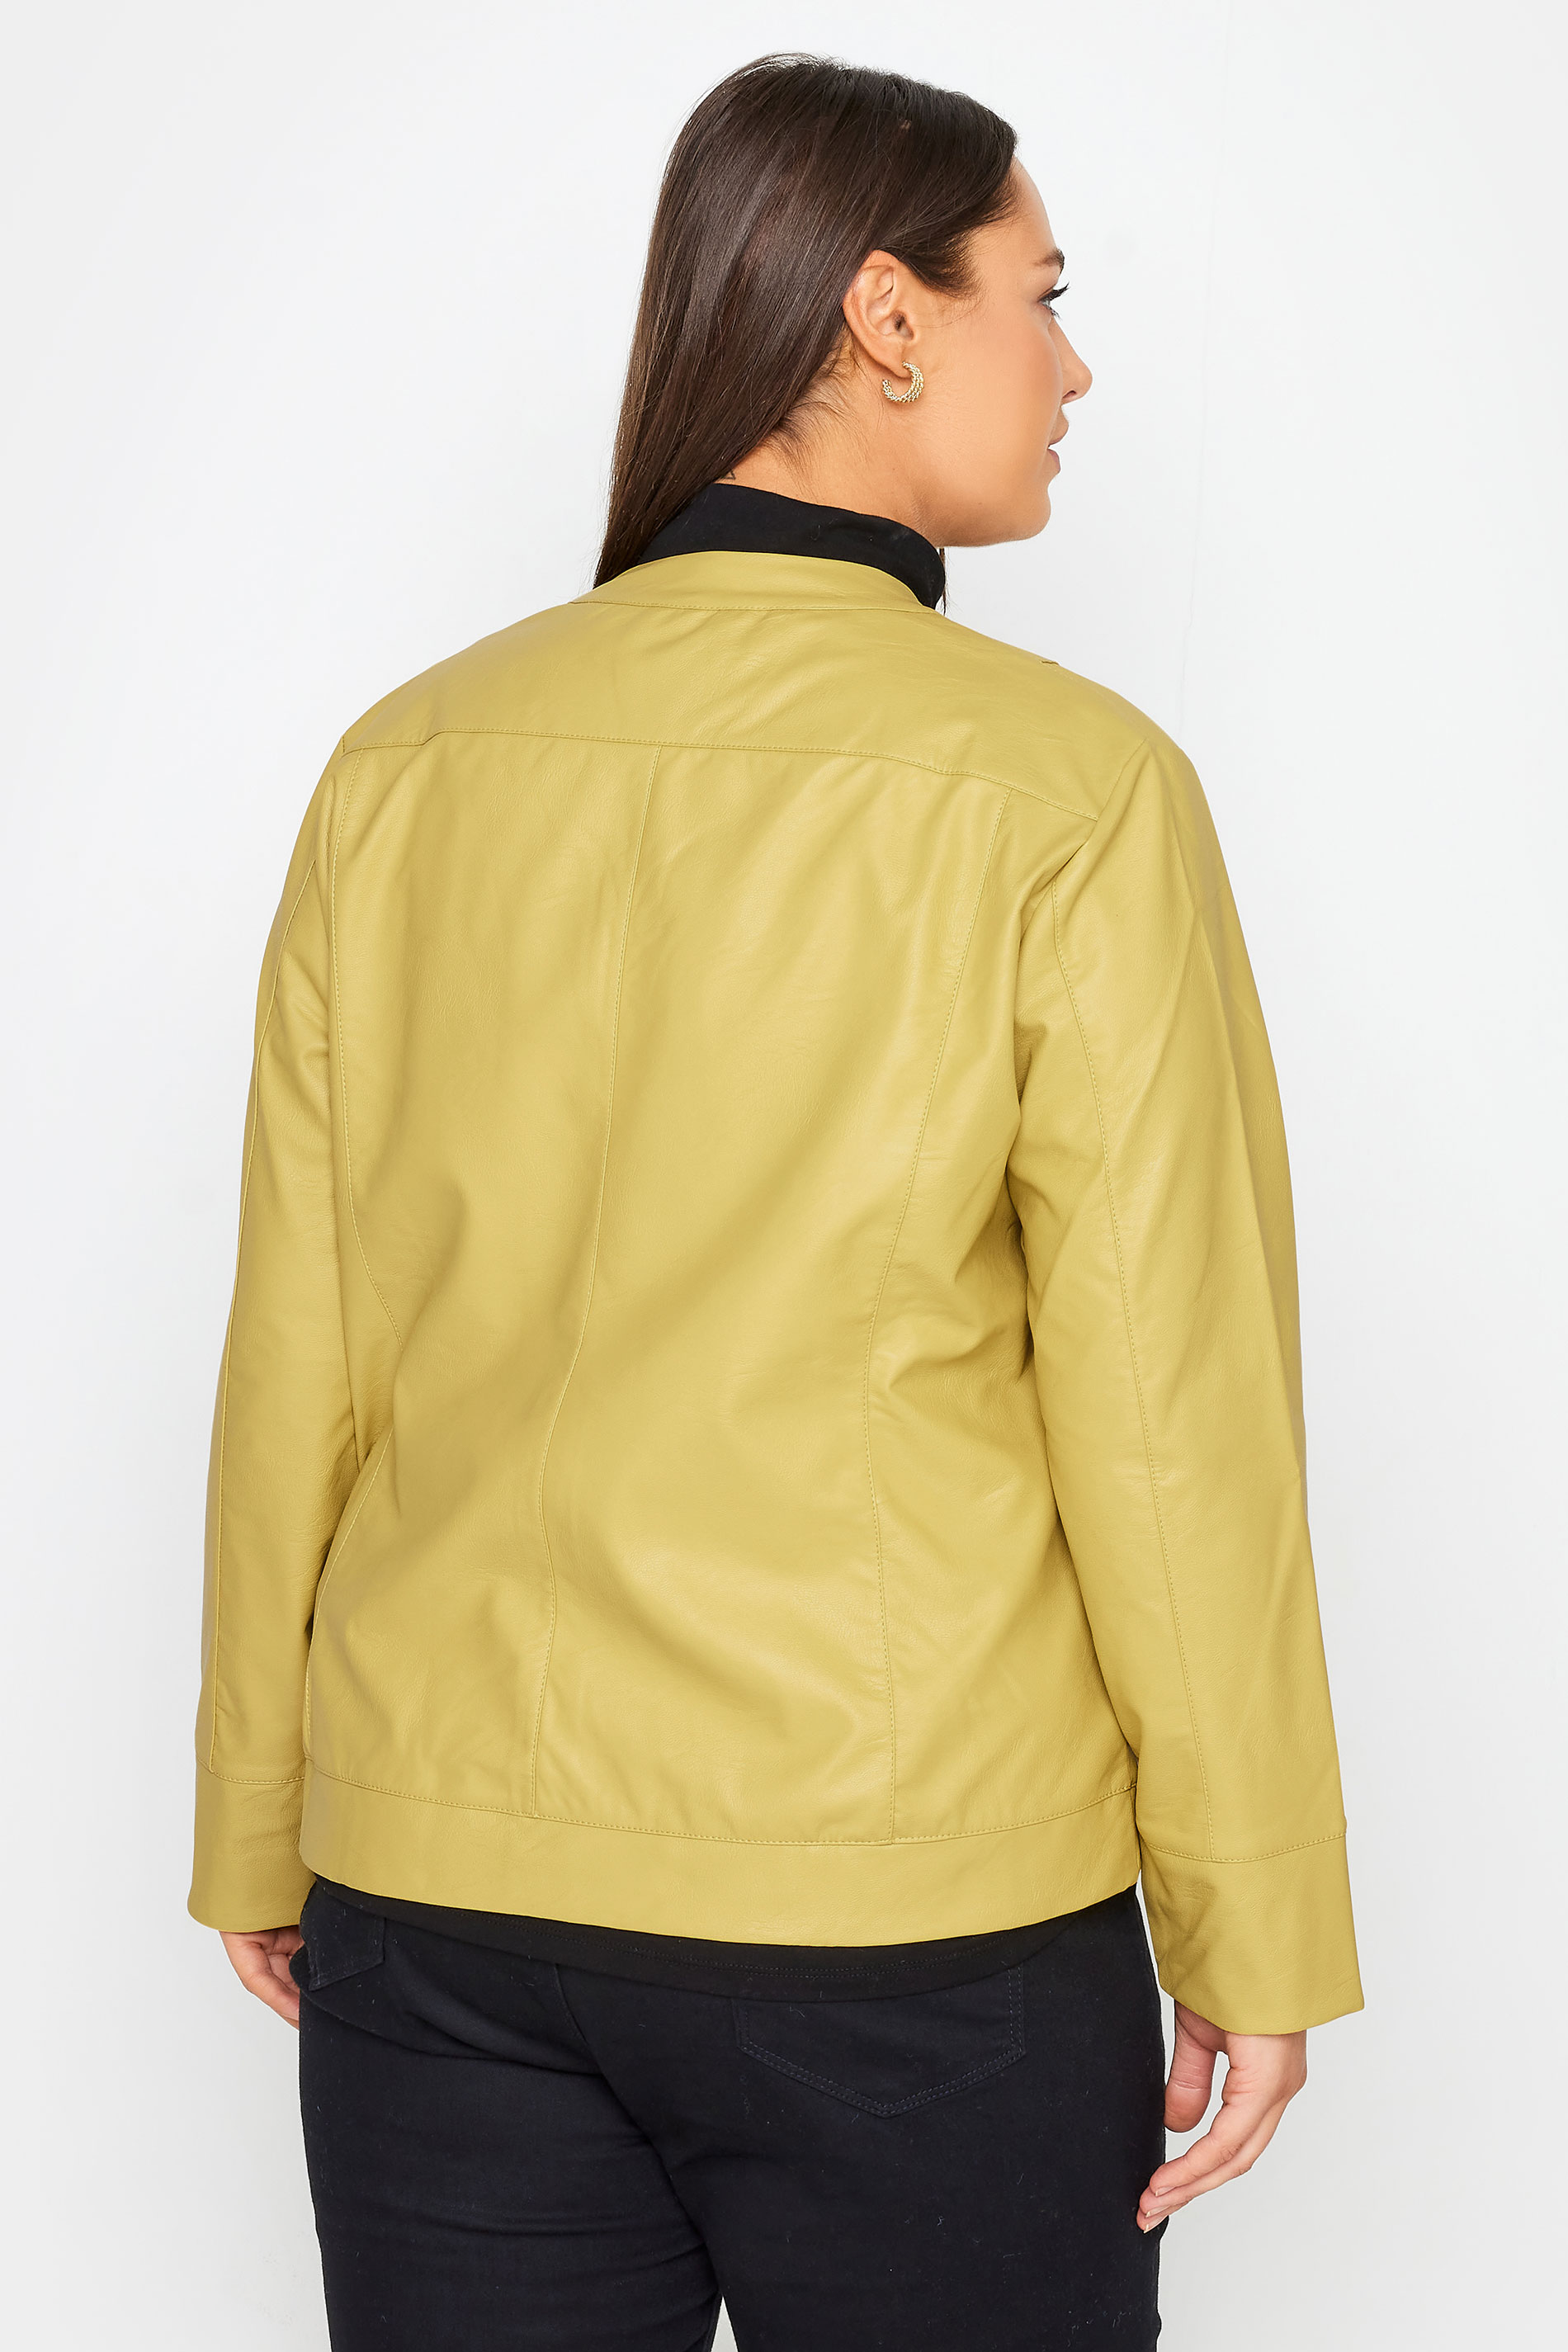 Evans Mustard Yellow Faux Leather Collarless Jacket 3